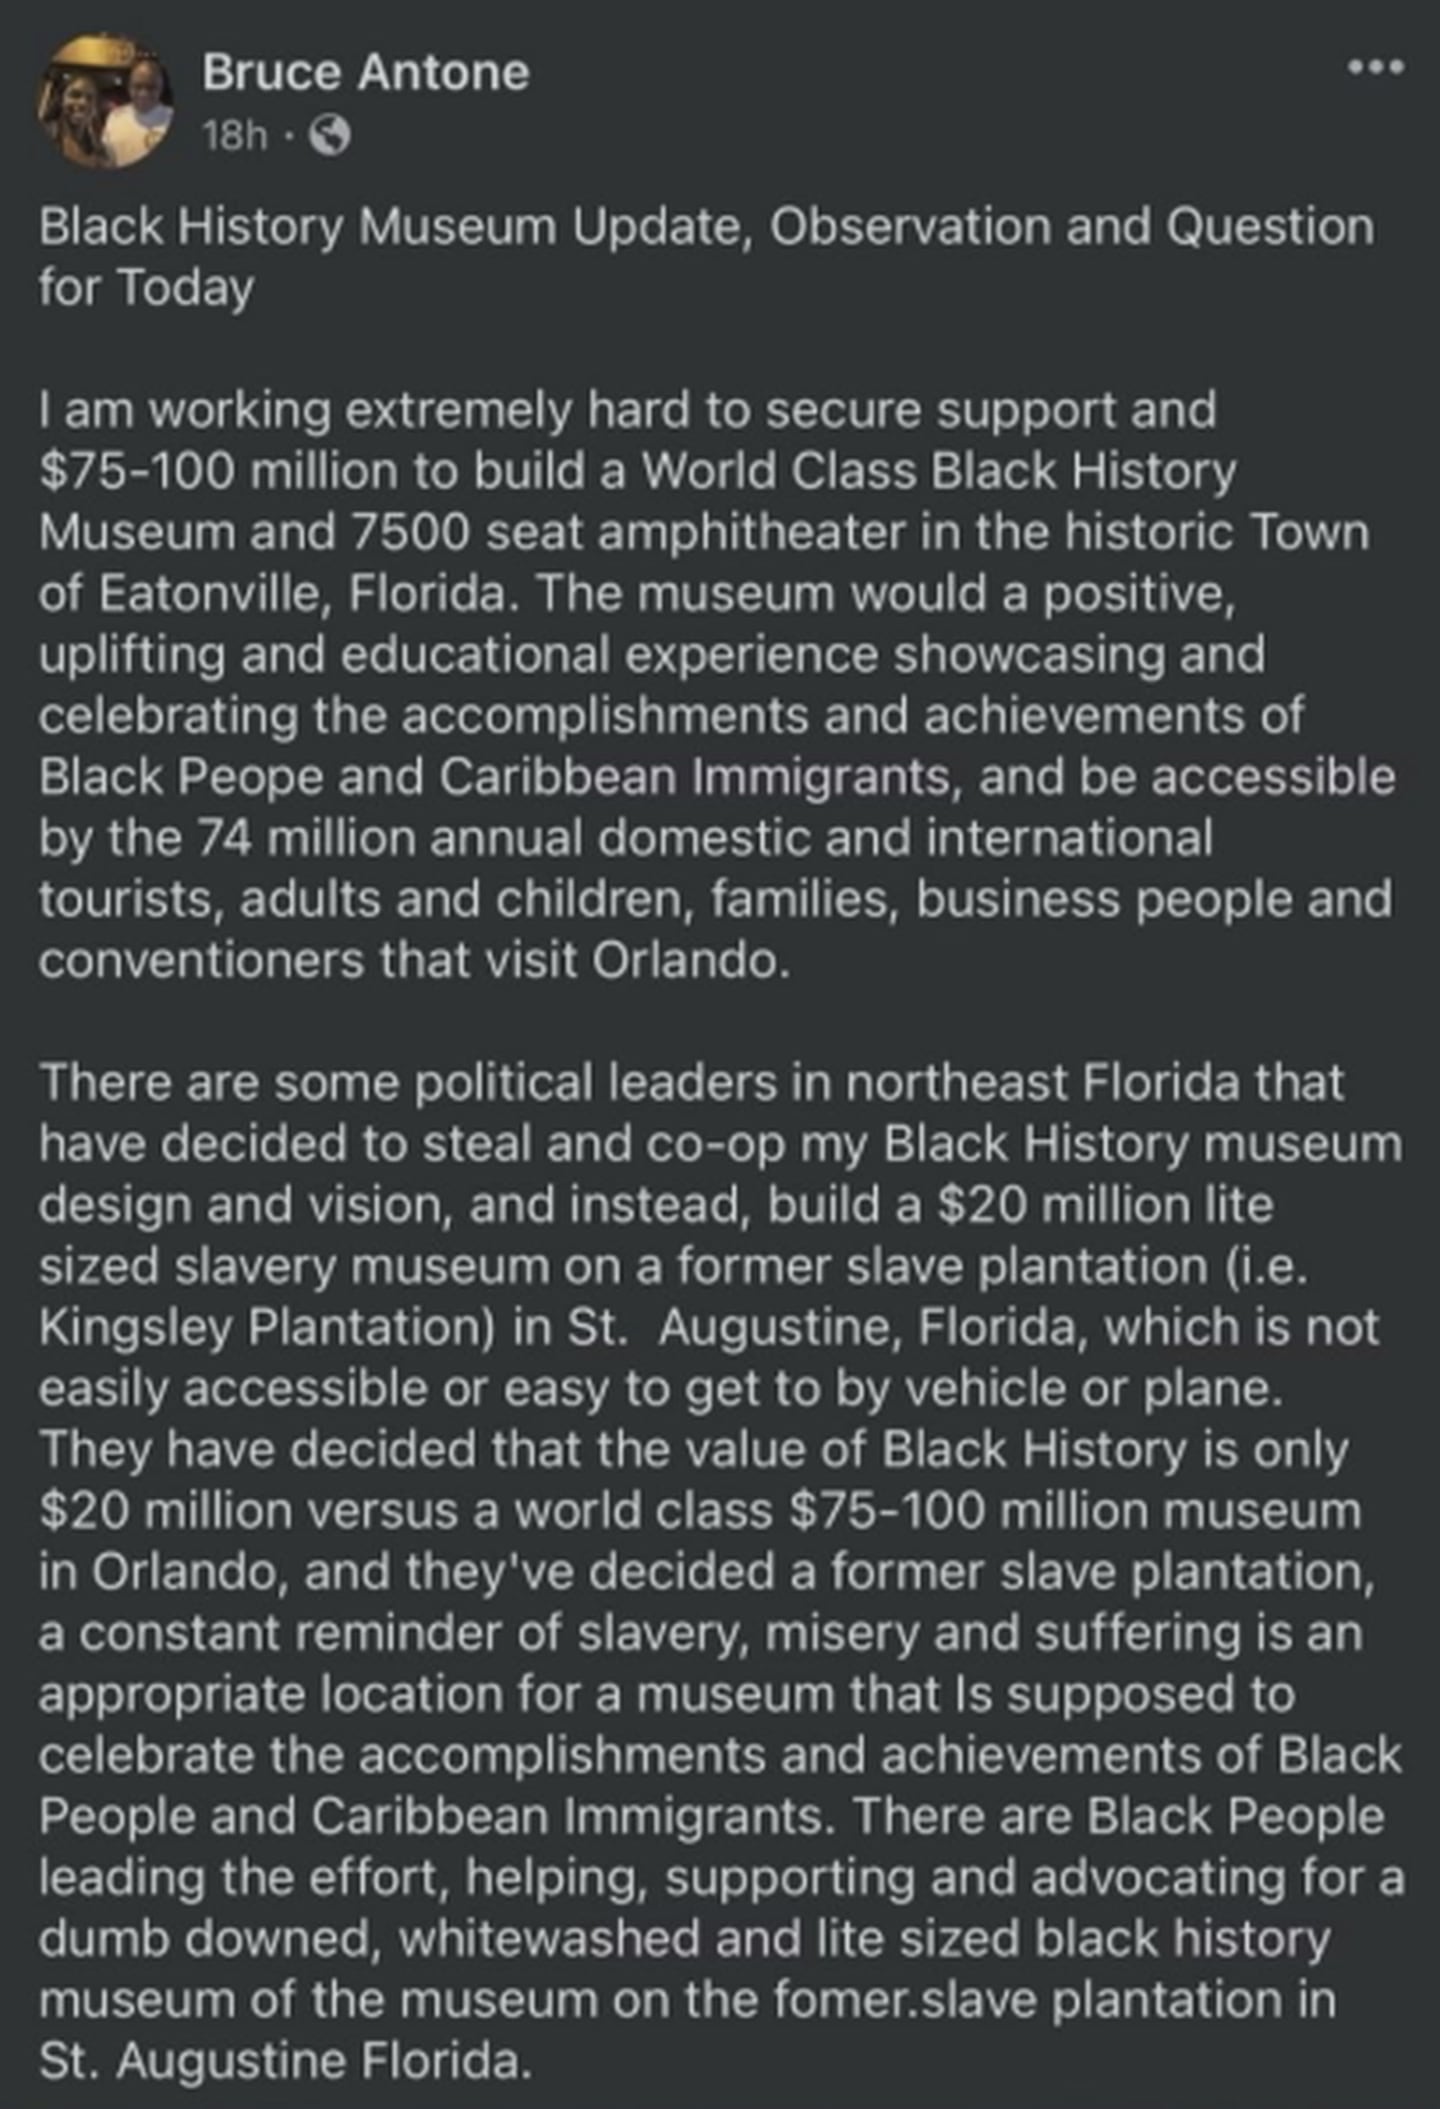 These comments made by Central Florida Rep. Bruce Antone on the proposed Black History Museum to be built in St. Augustine were deleted on Facebook.